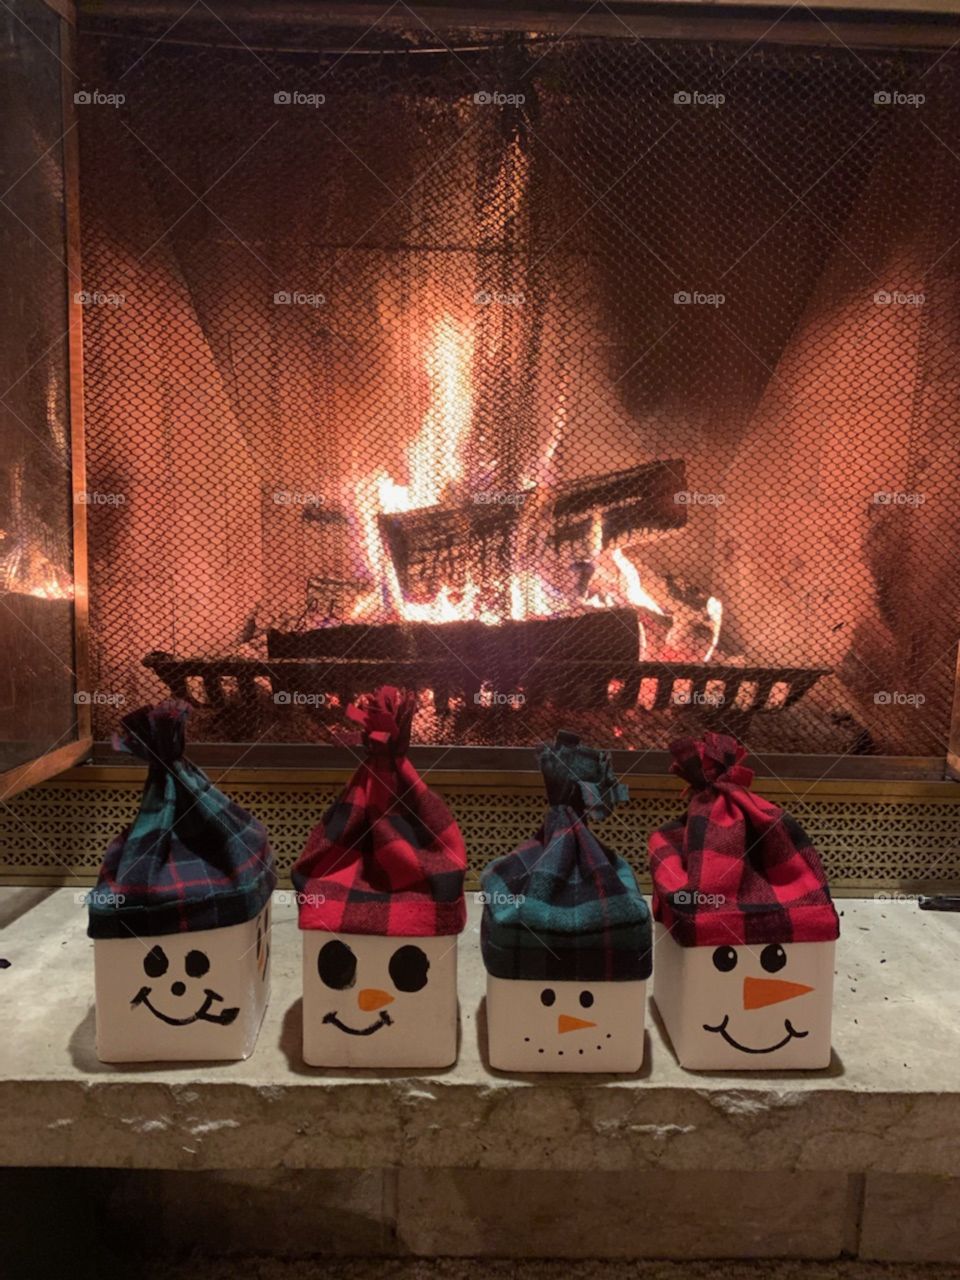 The warm fire is definitely my ideal winter activity, but painting snowman wood blocks was a ton of fun too.